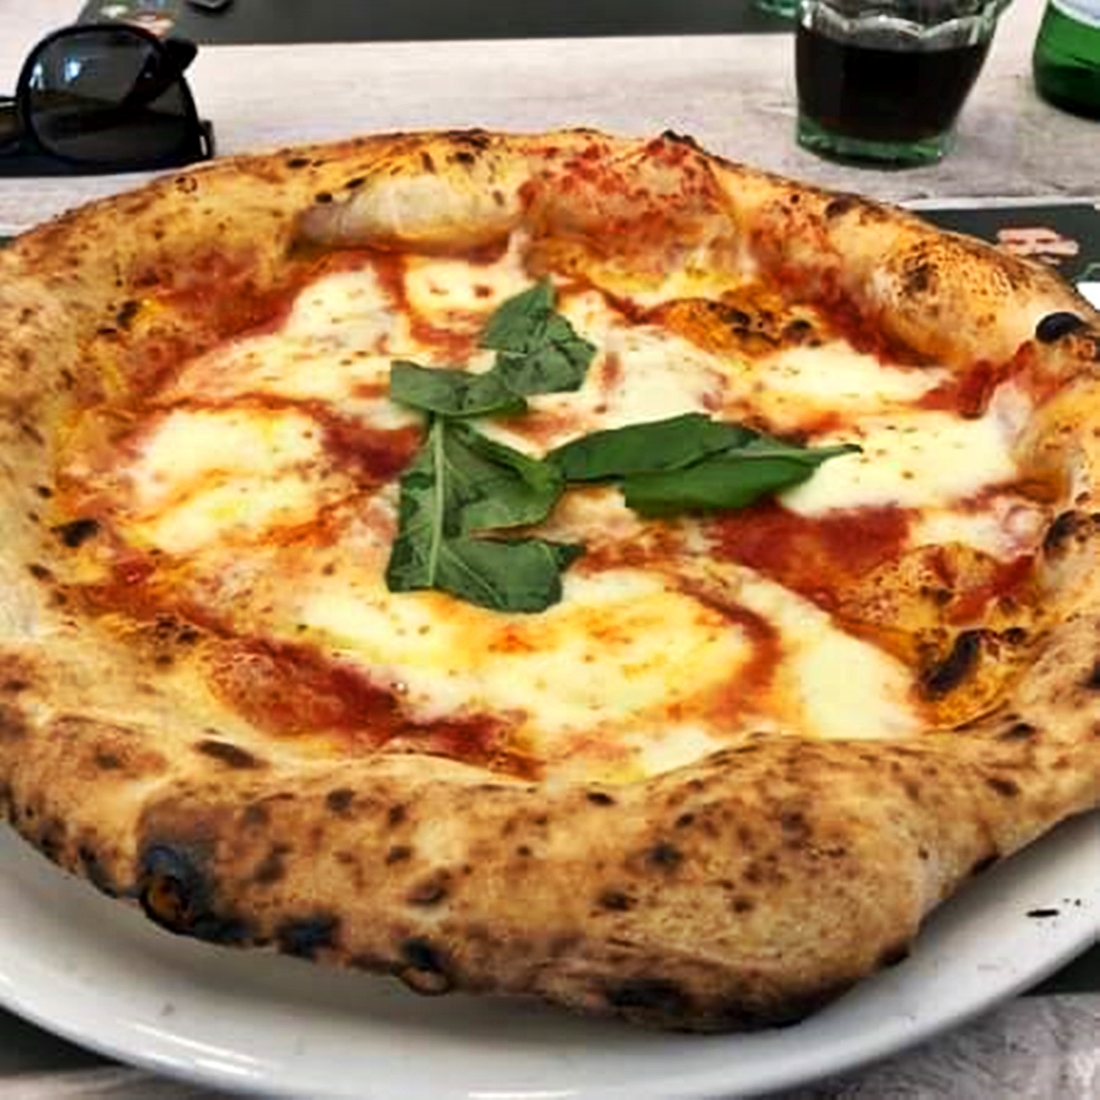 Perfectly baked pizza Margherita